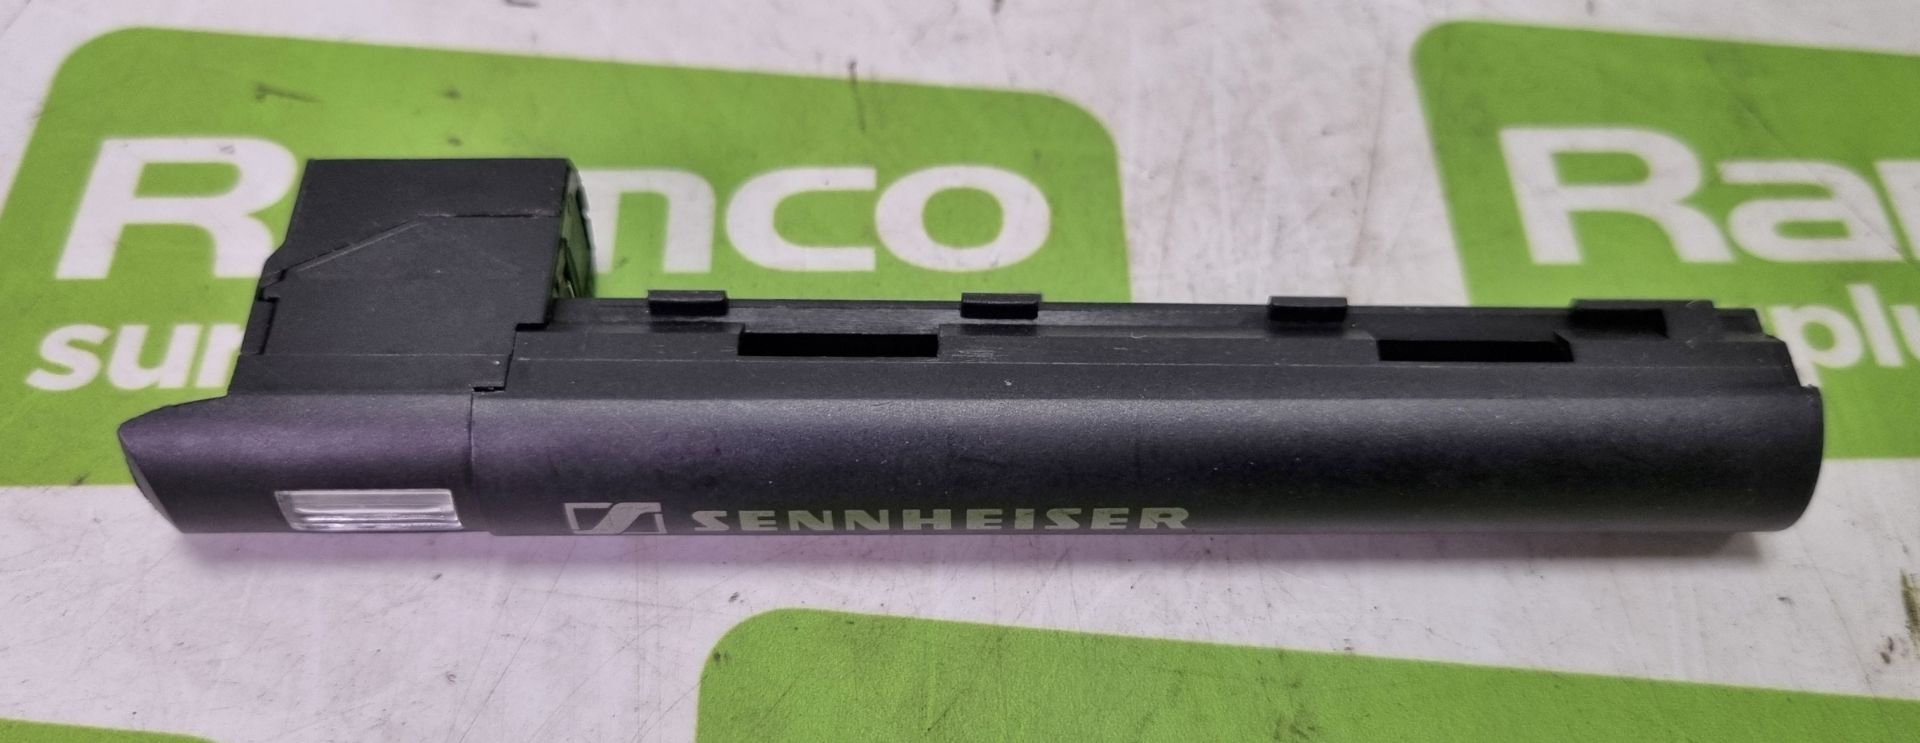 Sennheiser B 5000 AA battery compartment for SKM5200 and SKM5000 microphones - Part No: 500824 - Image 2 of 3